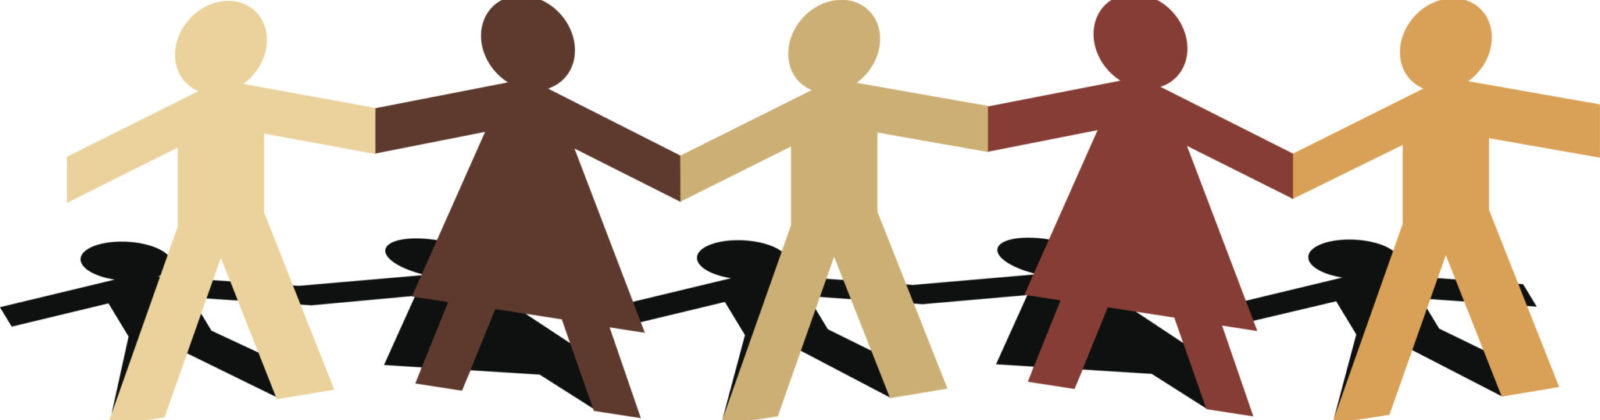 Vector illustration of male and female multi-racial paper cut figures standing in a row.